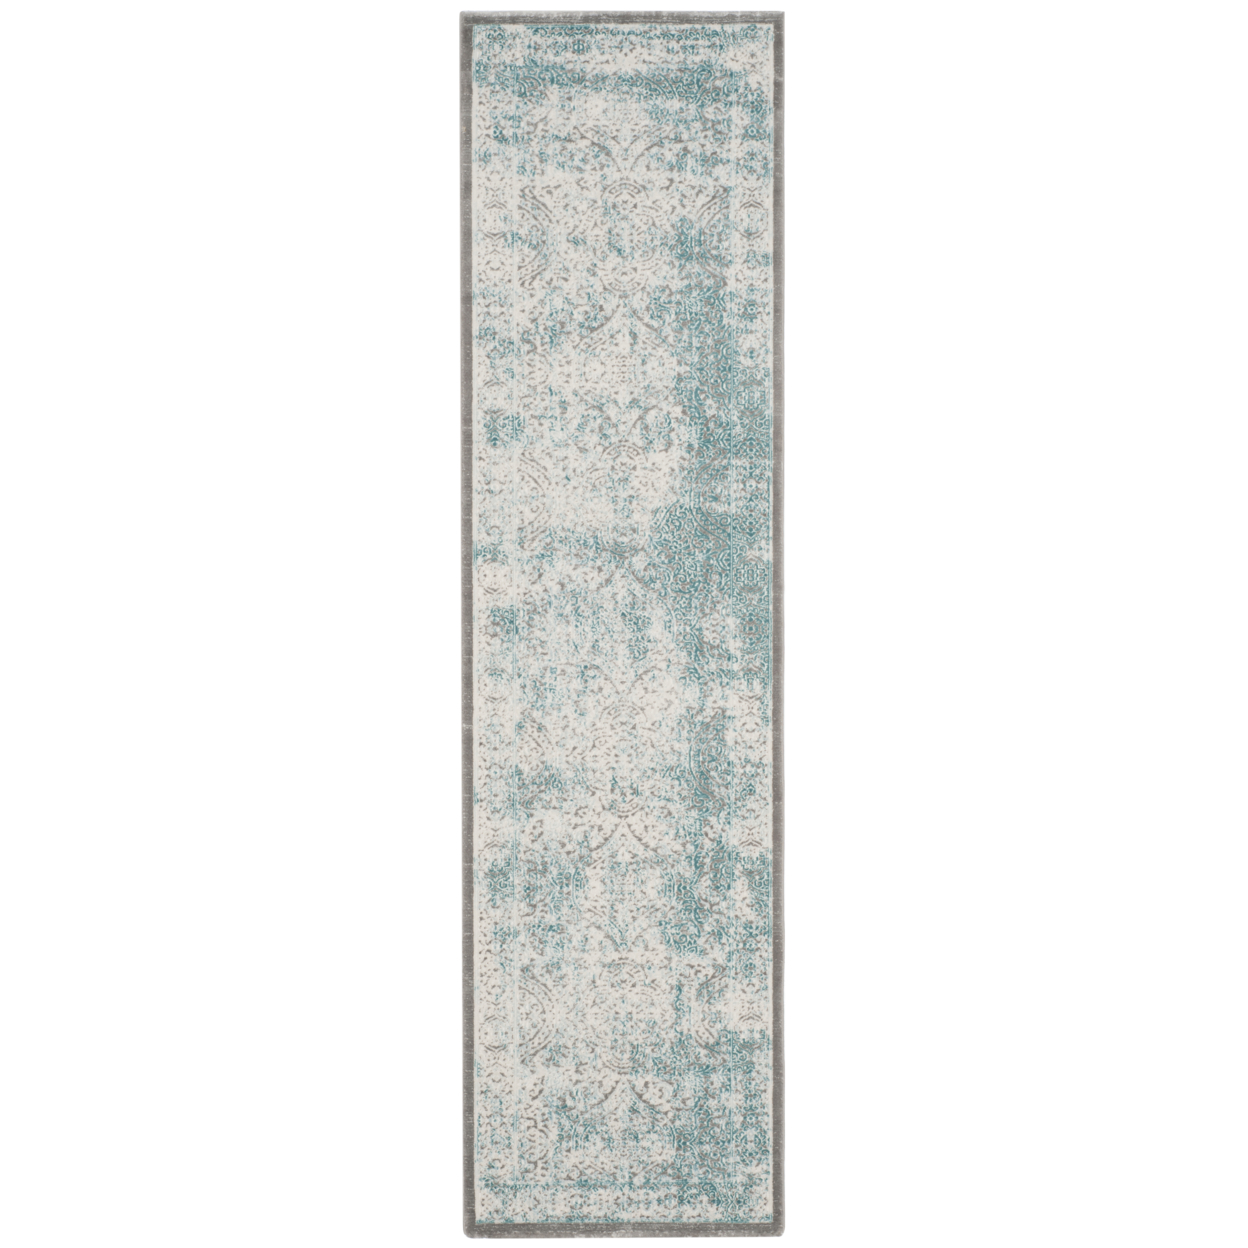 SAFAVIEH Passion Collection PAS401B Turquoise / Ivory Rug - 2' 2 X 14'